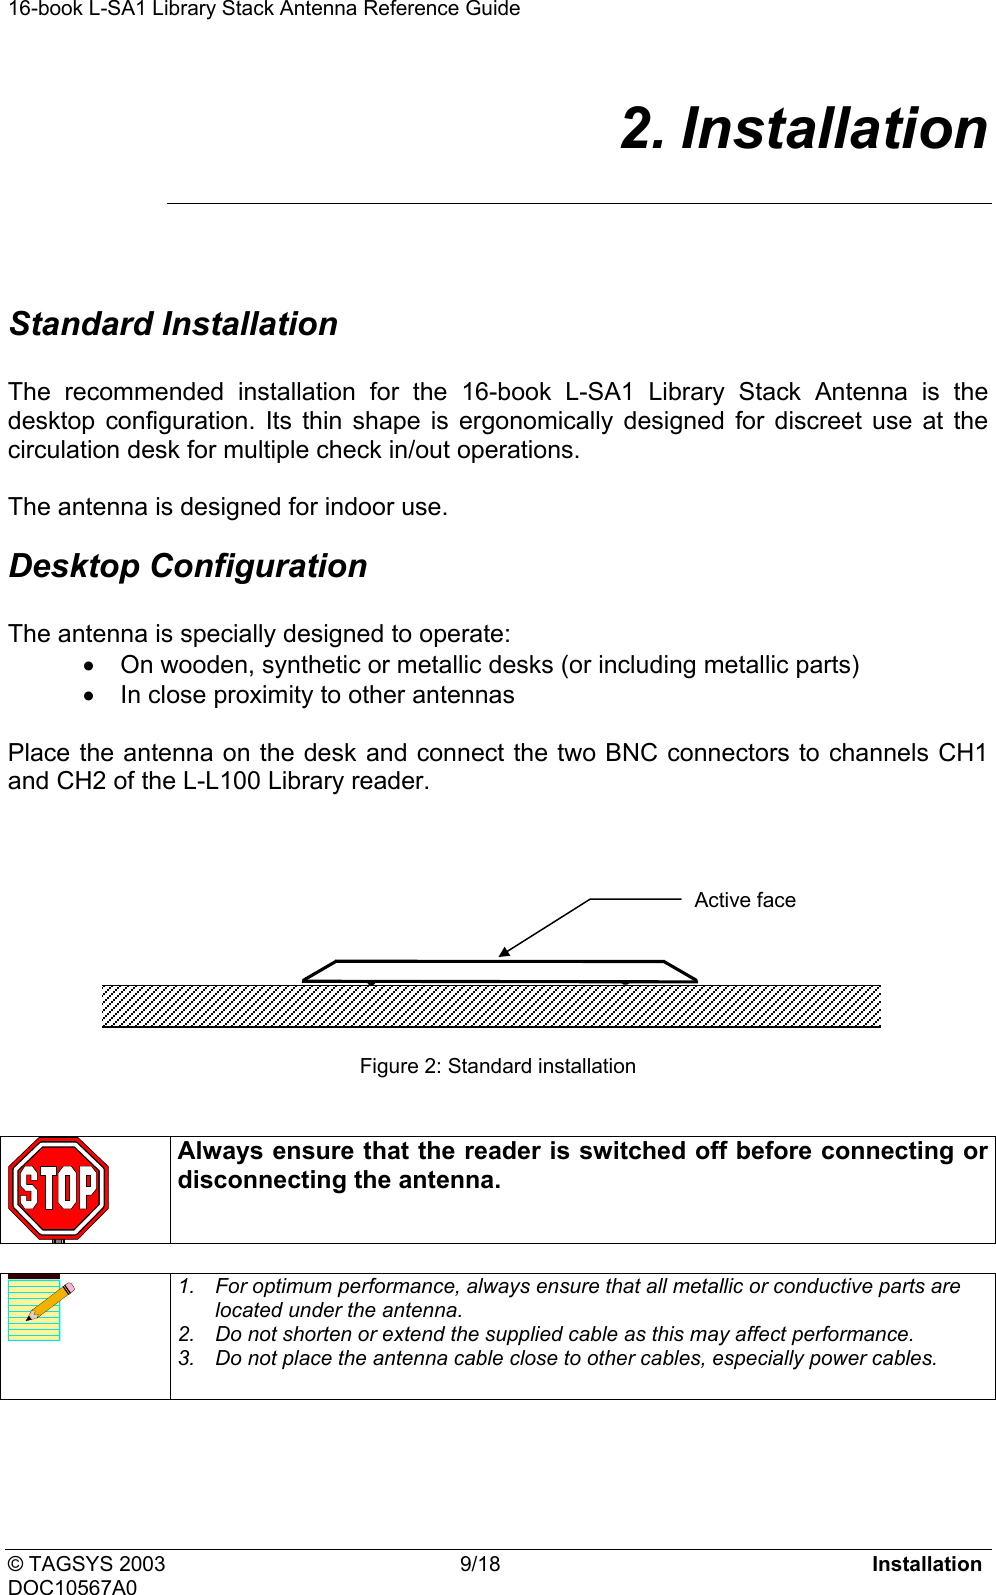 16-book L-SA1 Library Stack Antenna Reference Guide     2. Installation  Standard Installation  The recommended installation for the 16-book L-SA1 Library Stack Antenna is the desktop configuration. Its thin shape is ergonomically designed for discreet use at the circulation desk for multiple check in/out operations.  The antenna is designed for indoor use. Desktop Configuration  The antenna is specially designed to operate: •  On wooden, synthetic or metallic desks (or including metallic parts) •  In close proximity to other antennas  Place the antenna on the desk and connect the two BNC connectors to channels CH1 and CH2 of the L-L100 Library reader.     Active face      Figure 2: Standard installation    Always ensure that the reader is switched off before connecting or disconnecting the antenna.    1.  For optimum performance, always ensure that all metallic or conductive parts are located under the antenna. 2.  Do not shorten or extend the supplied cable as this may affect performance. 3.  Do not place the antenna cable close to other cables, especially power cables.    © TAGSYS 2003  9/18  Installation DOC10567A0 